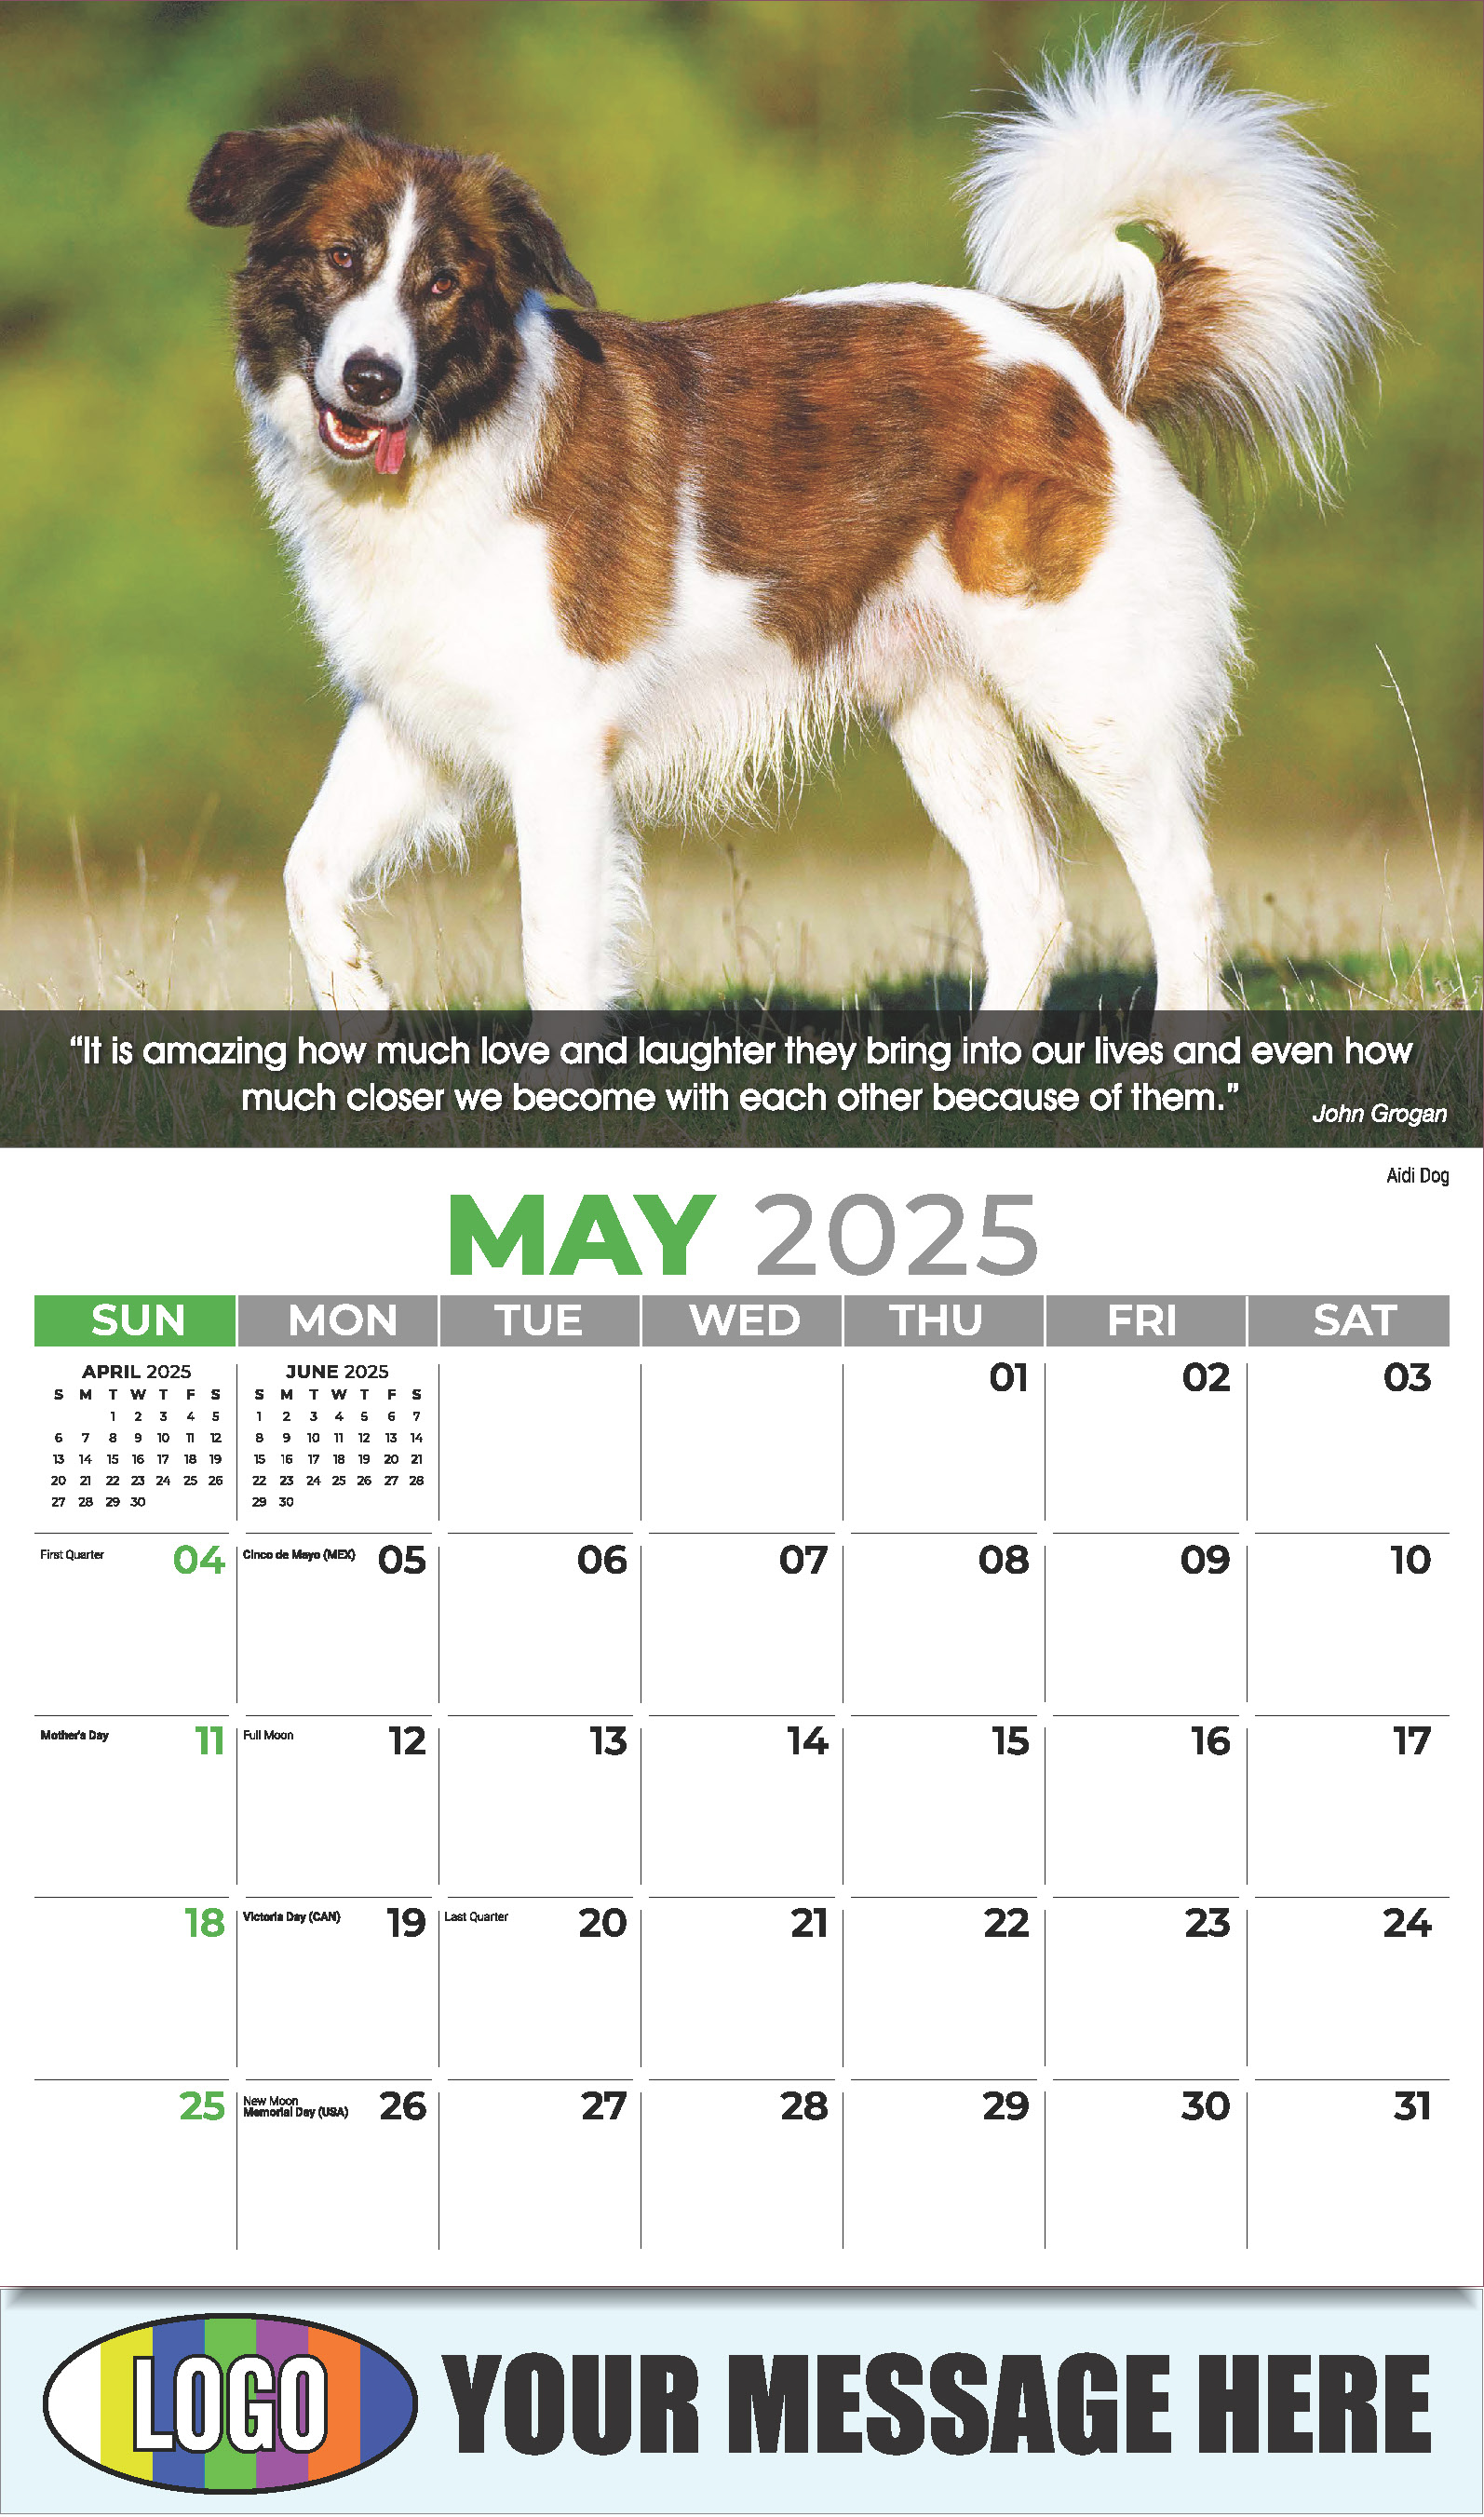 Dogs 2025 Vets and Pets Business Promotion Calendar - May